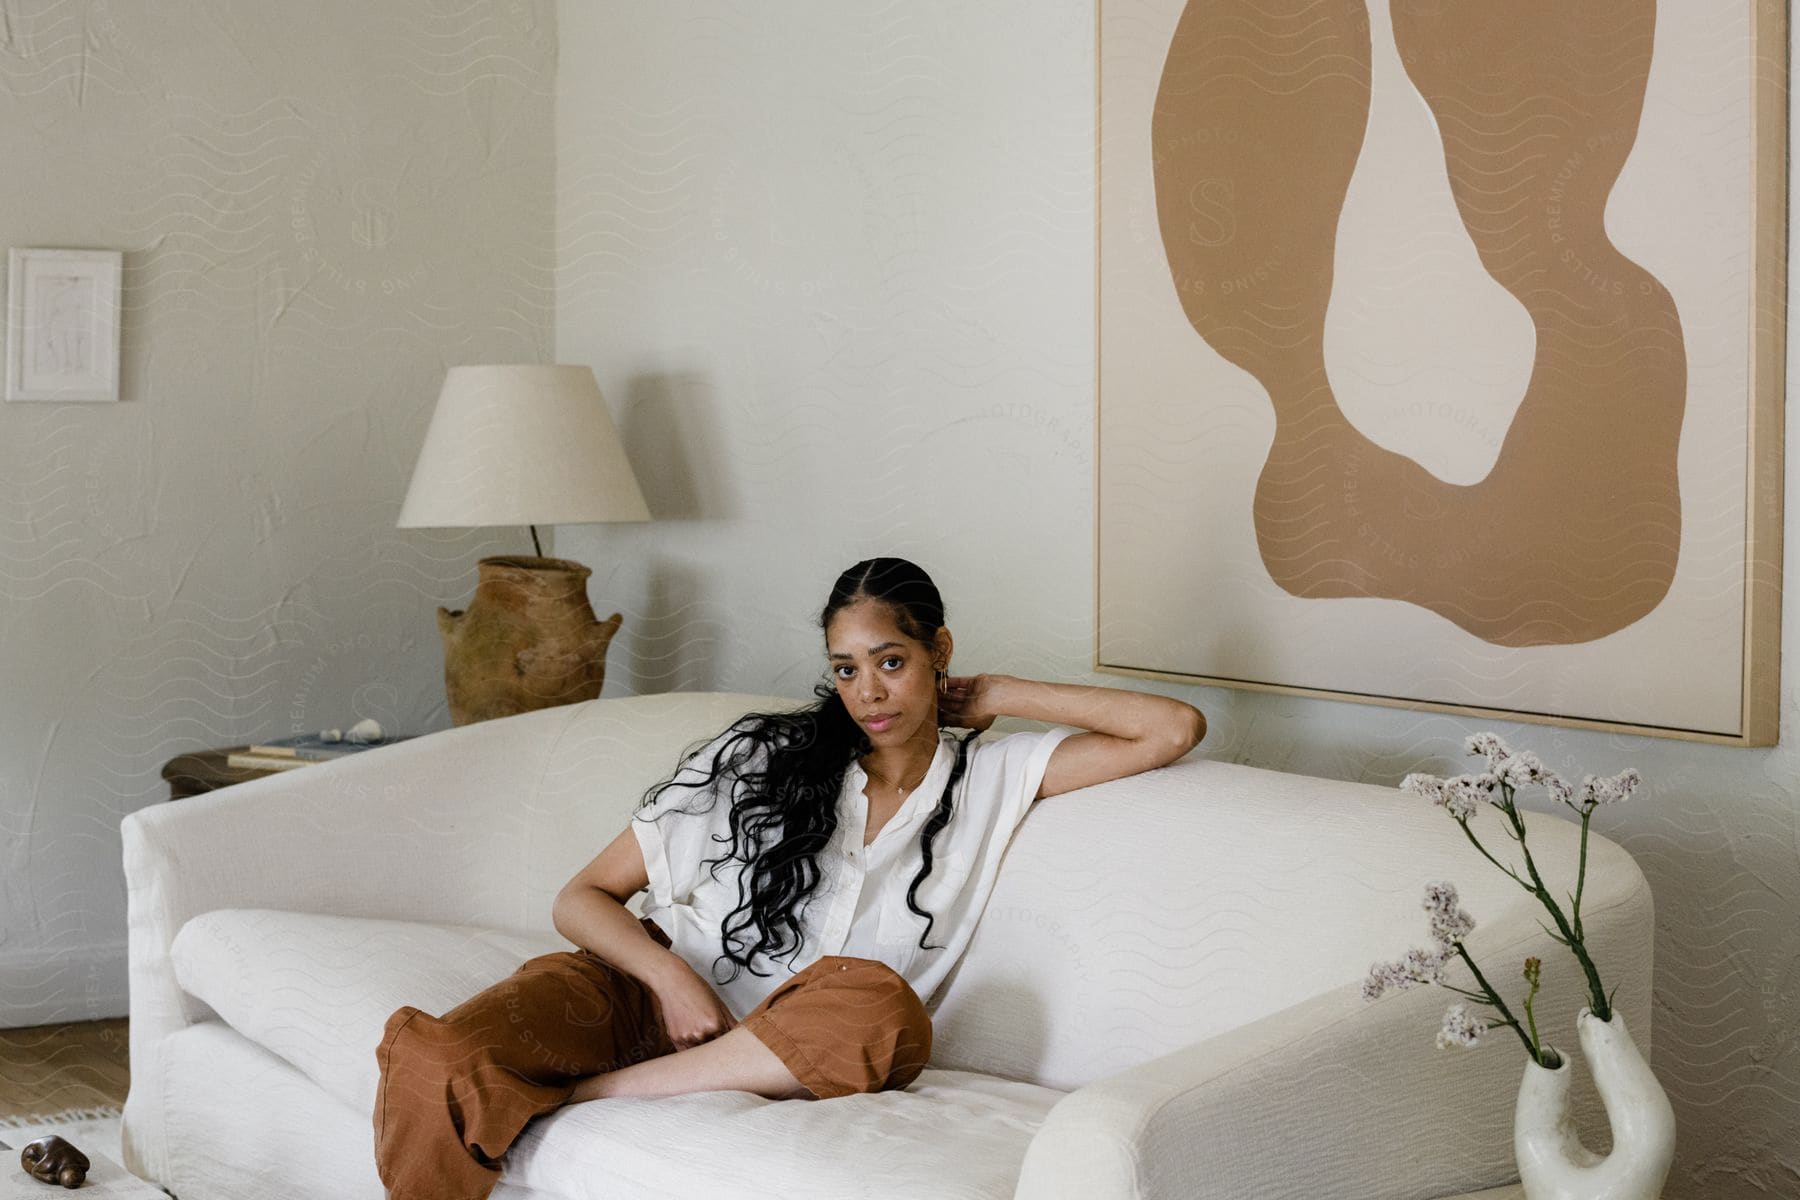 A woman sitting on a couch modeling clothes.